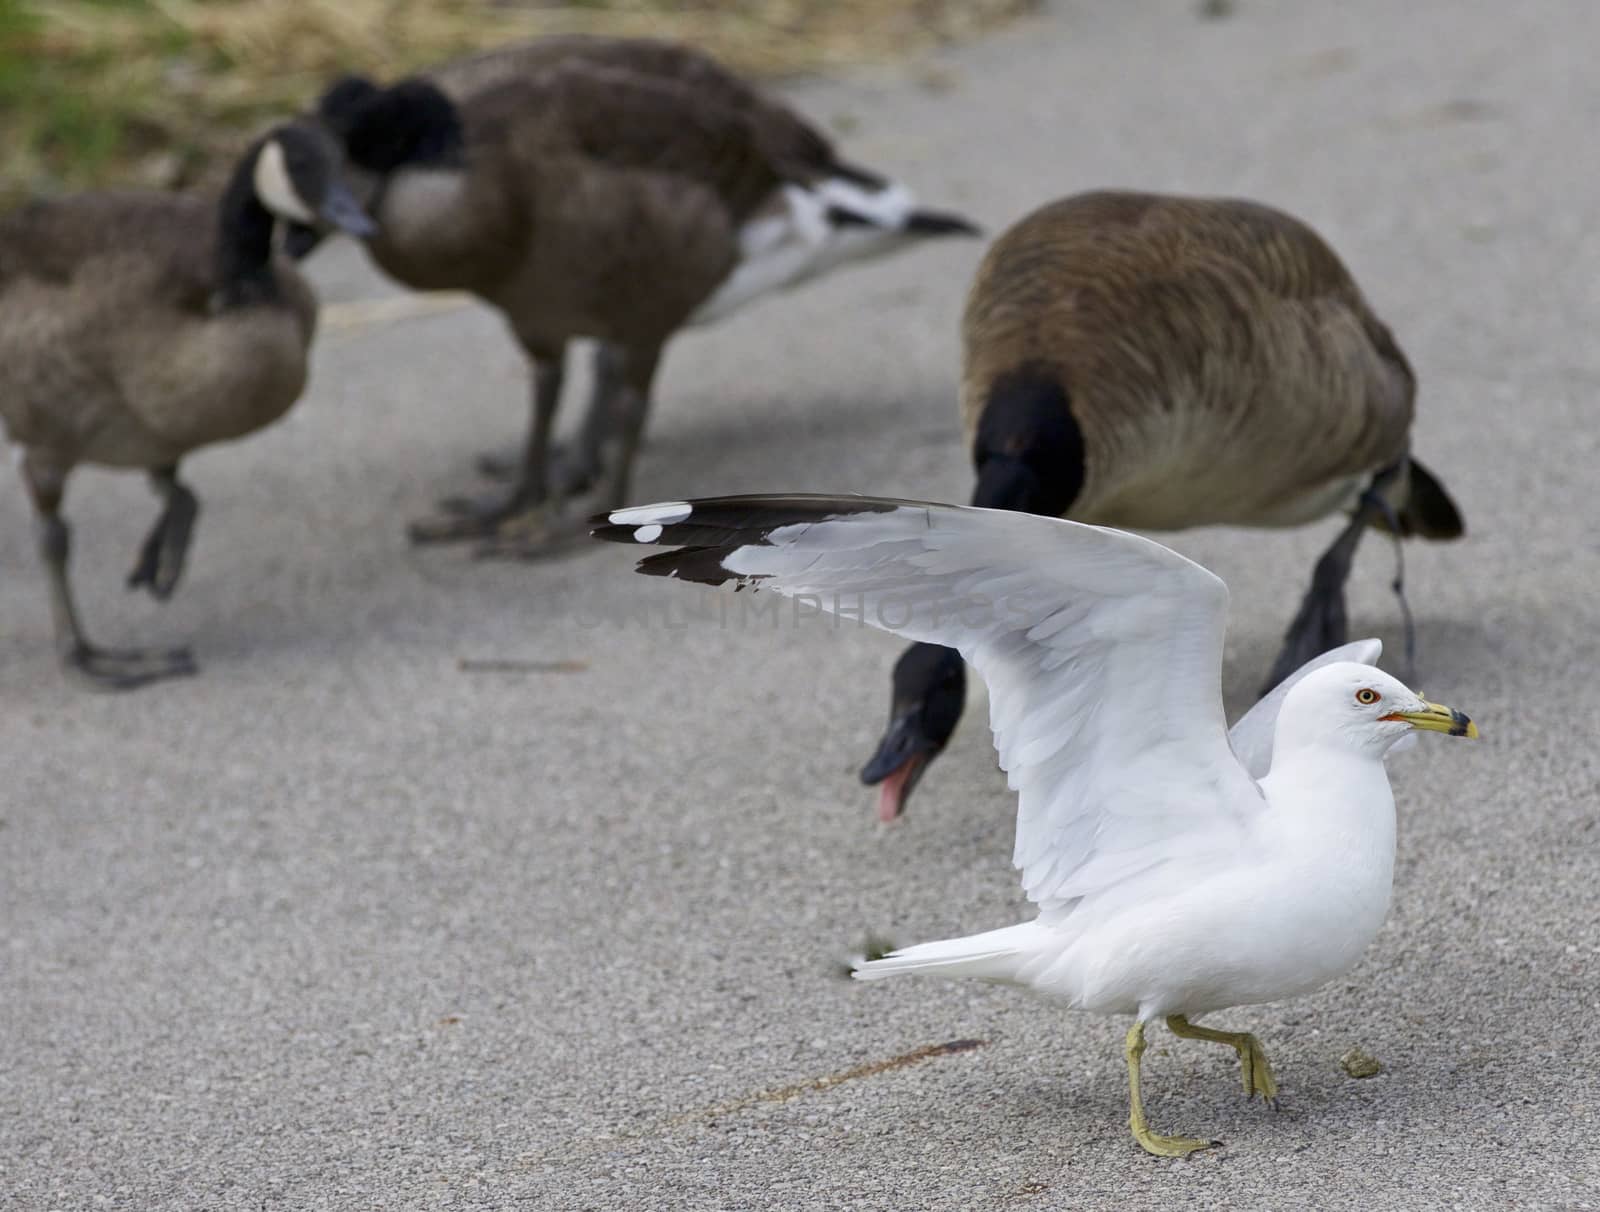 Funny photo of a gull jumping away from the angry Canada geese